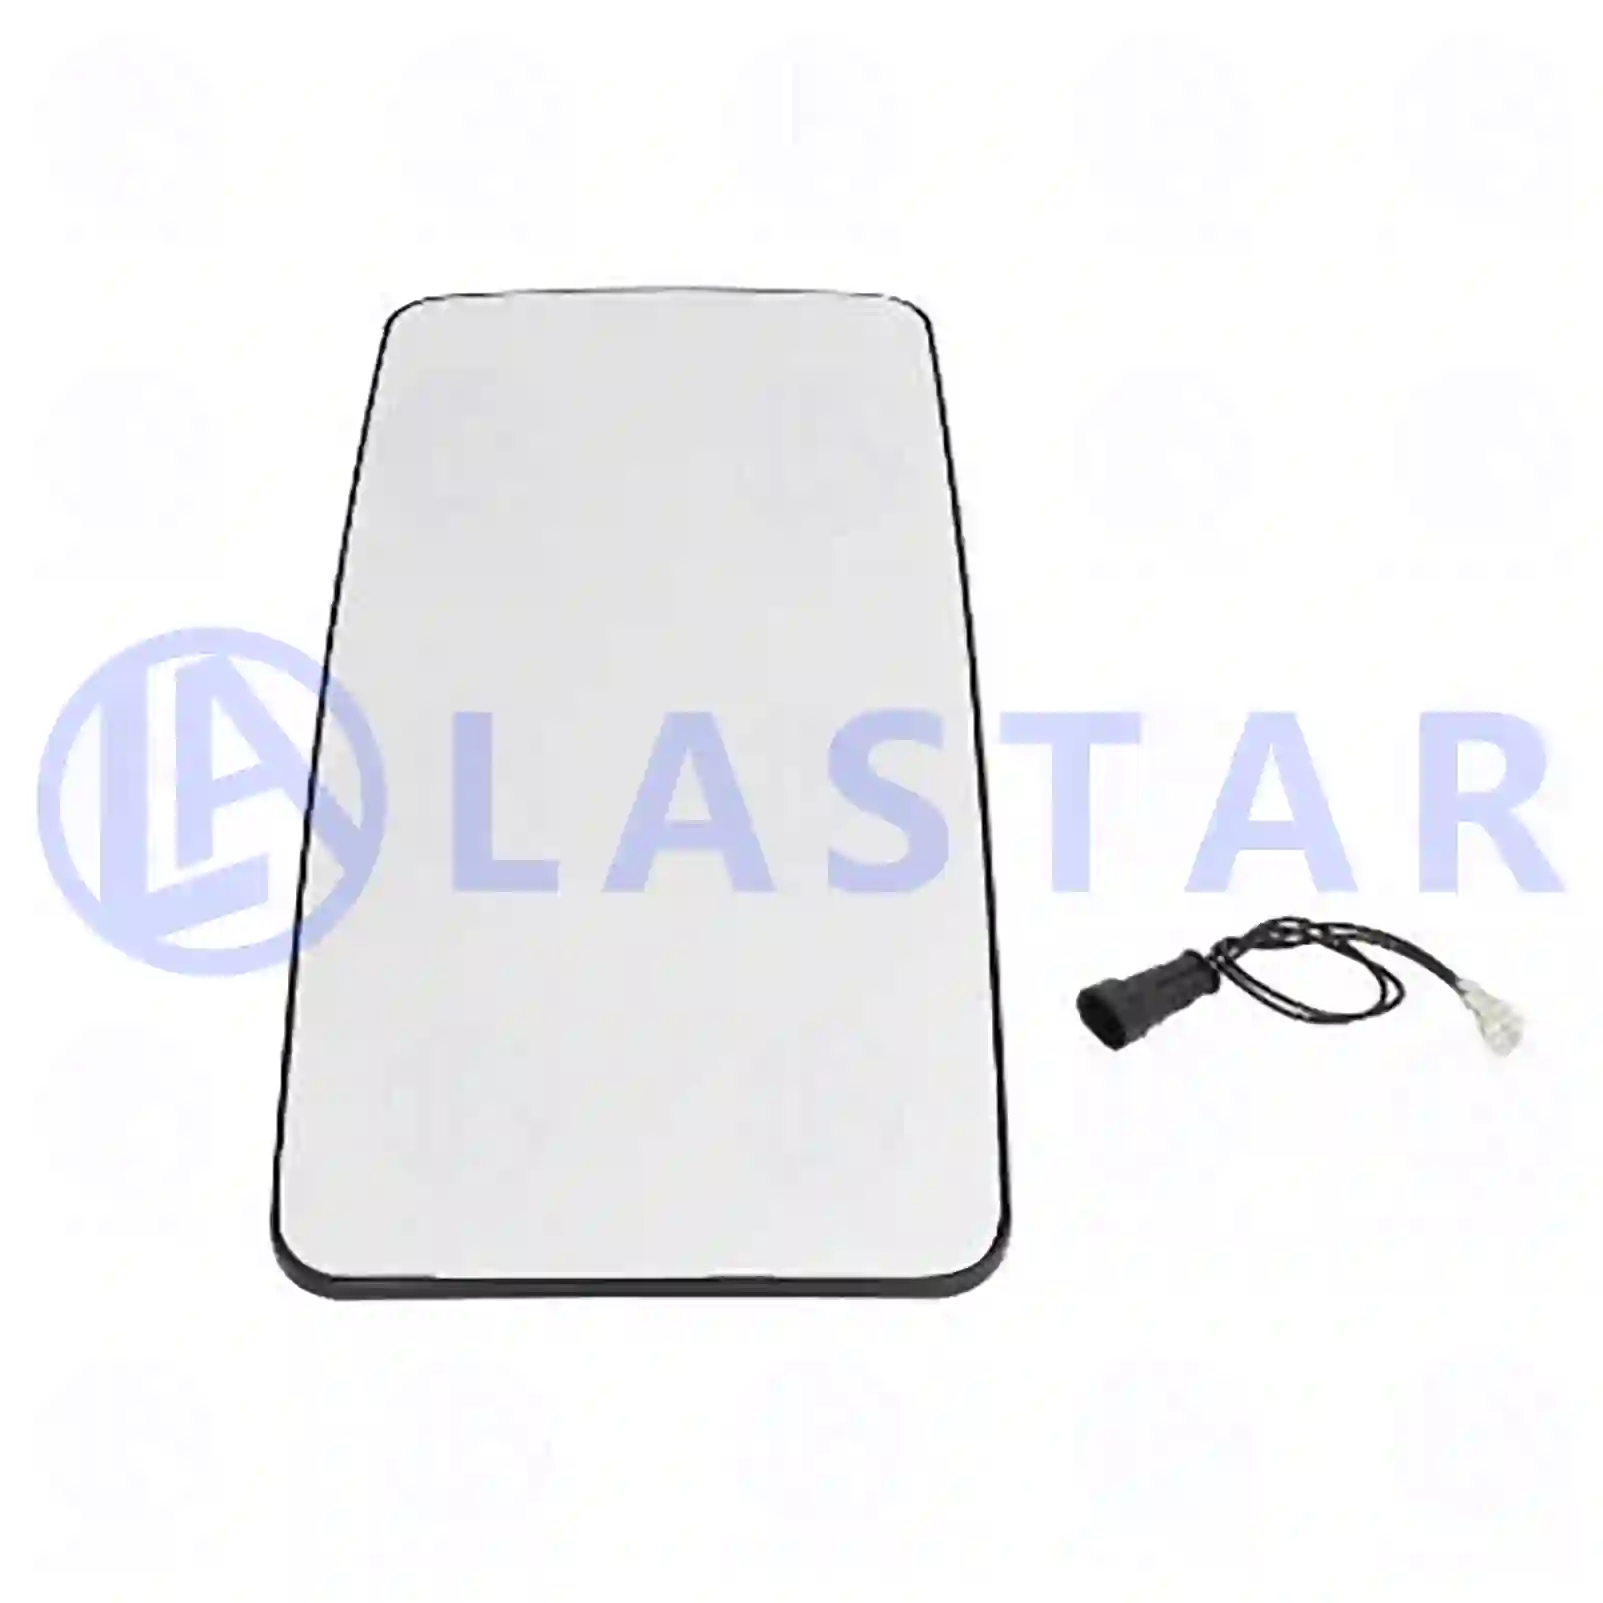 Mirror glass, main mirror, heated, 77720461, 02997154, 2997154, 93193198 ||  77720461 Lastar Spare Part | Truck Spare Parts, Auotomotive Spare Parts Mirror glass, main mirror, heated, 77720461, 02997154, 2997154, 93193198 ||  77720461 Lastar Spare Part | Truck Spare Parts, Auotomotive Spare Parts